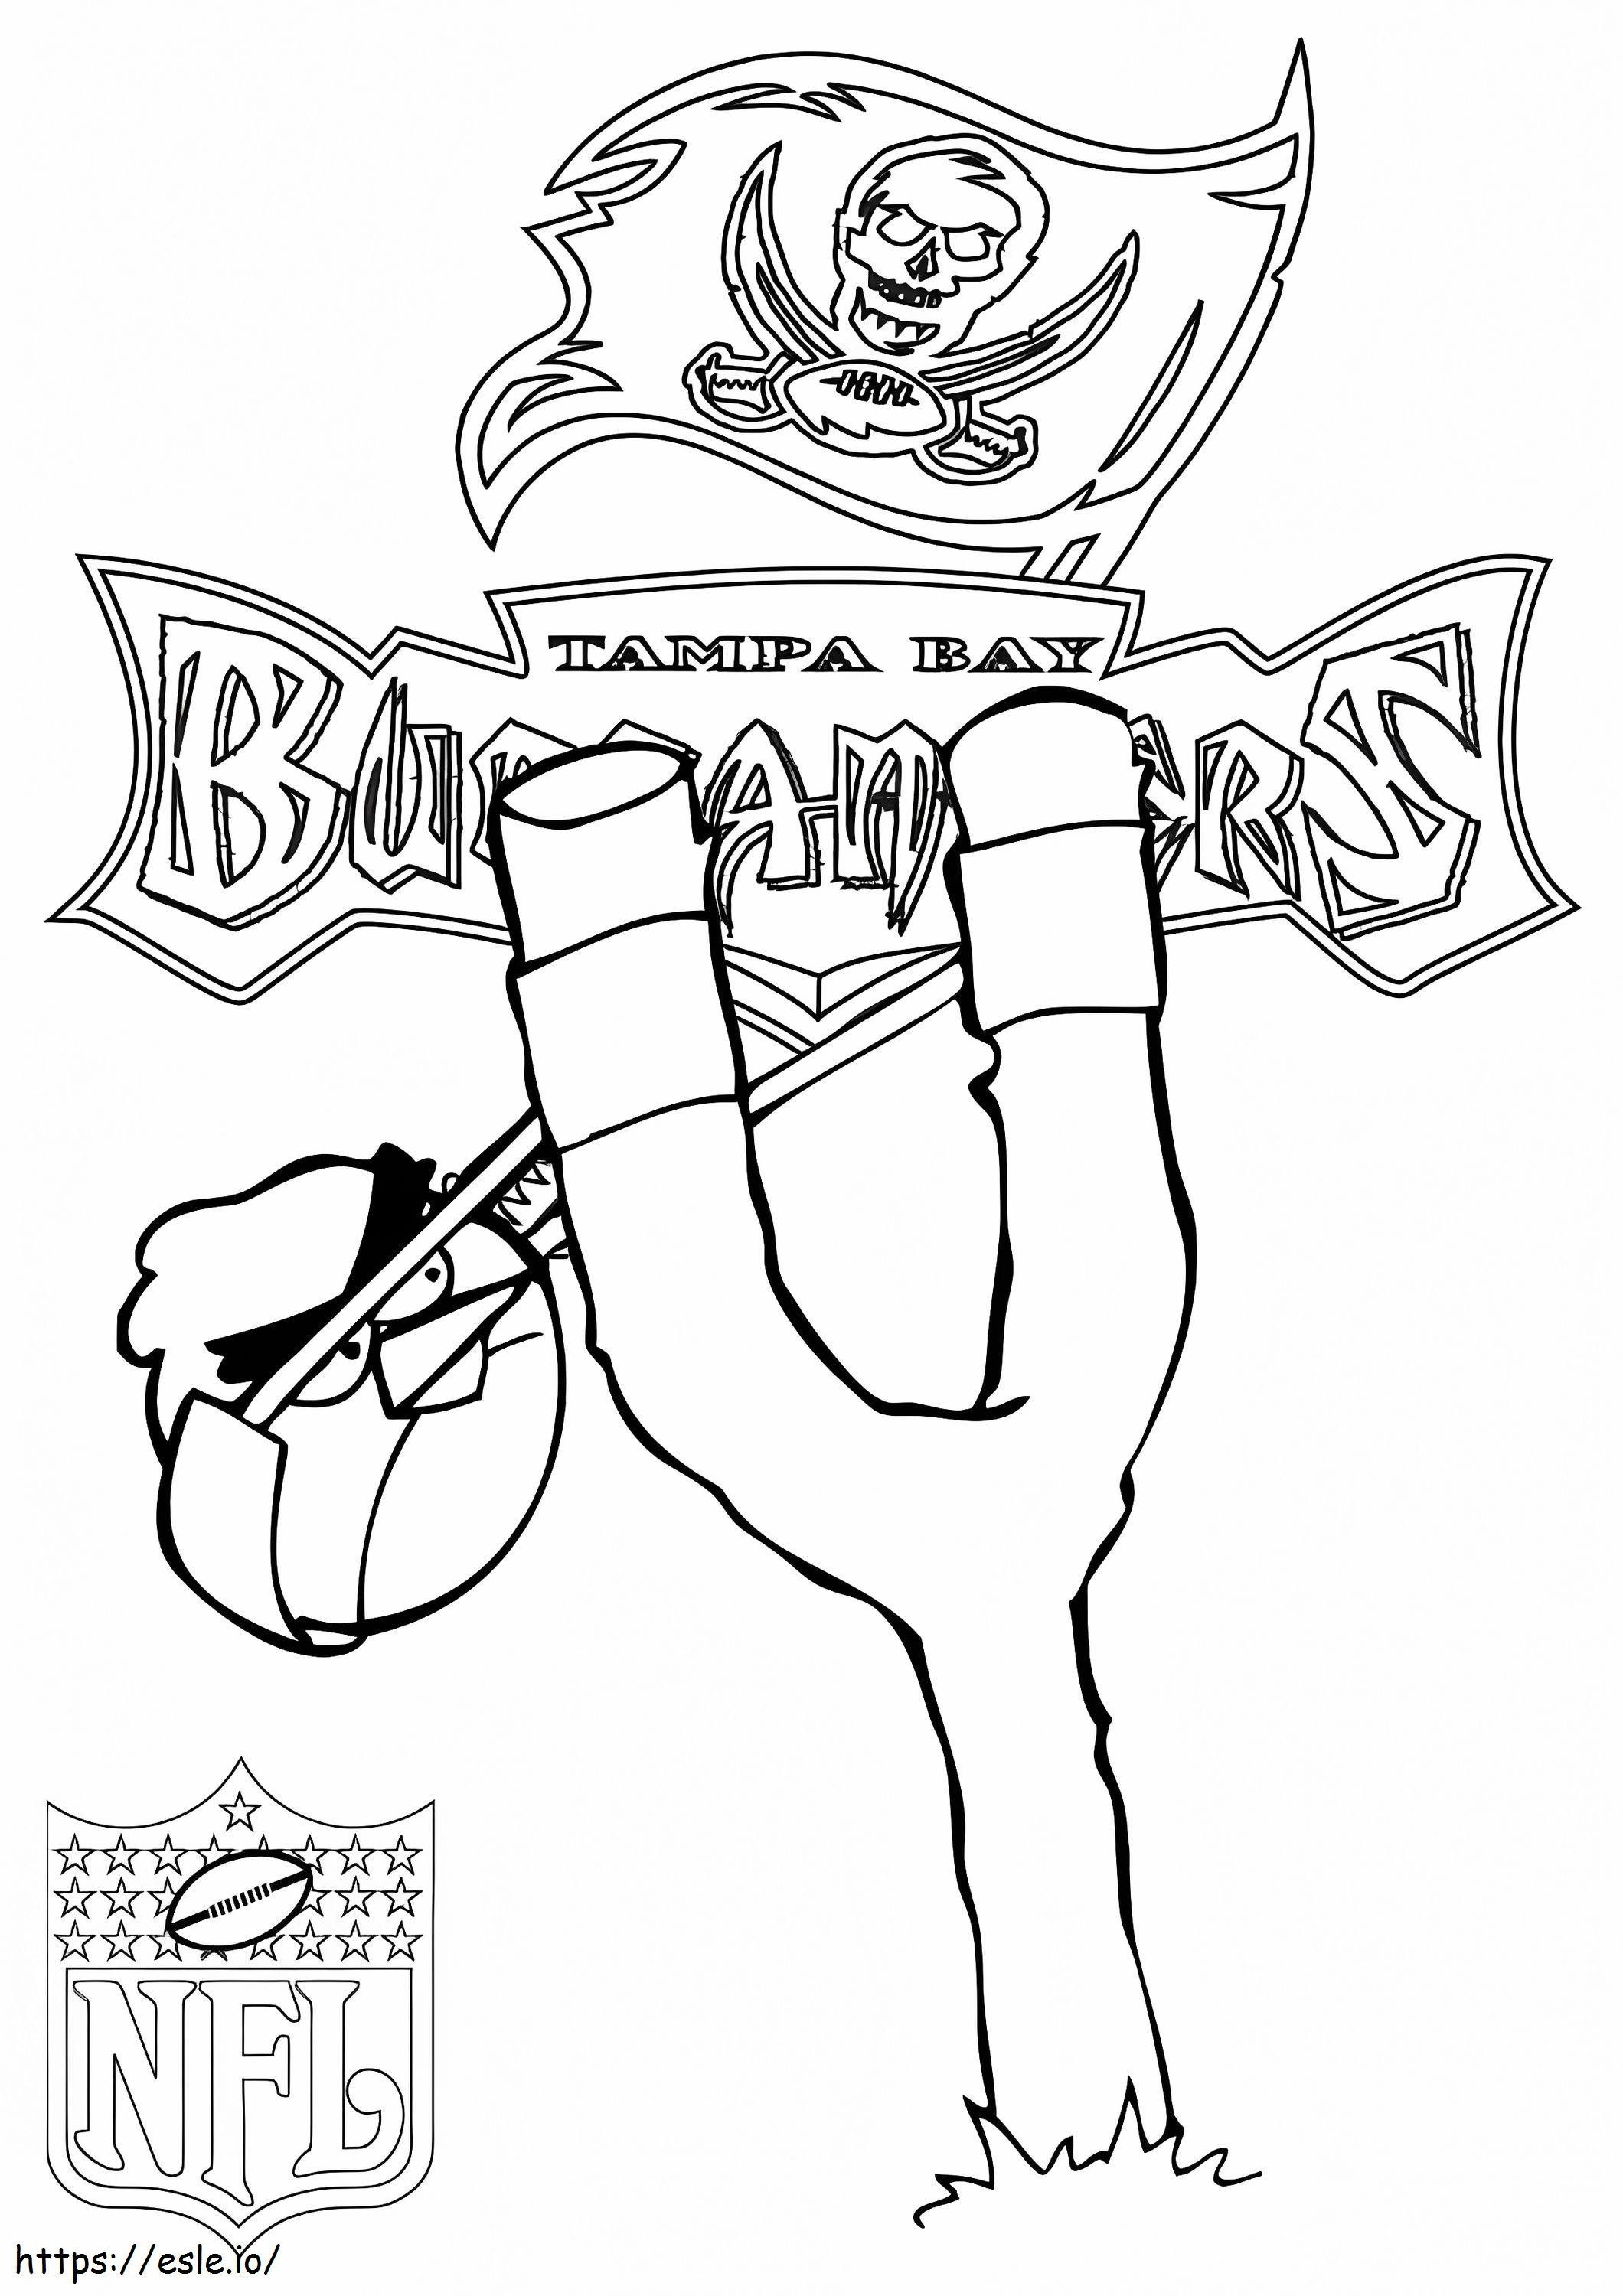 Tampa Bay Buccaneers With Angry Birds coloring page